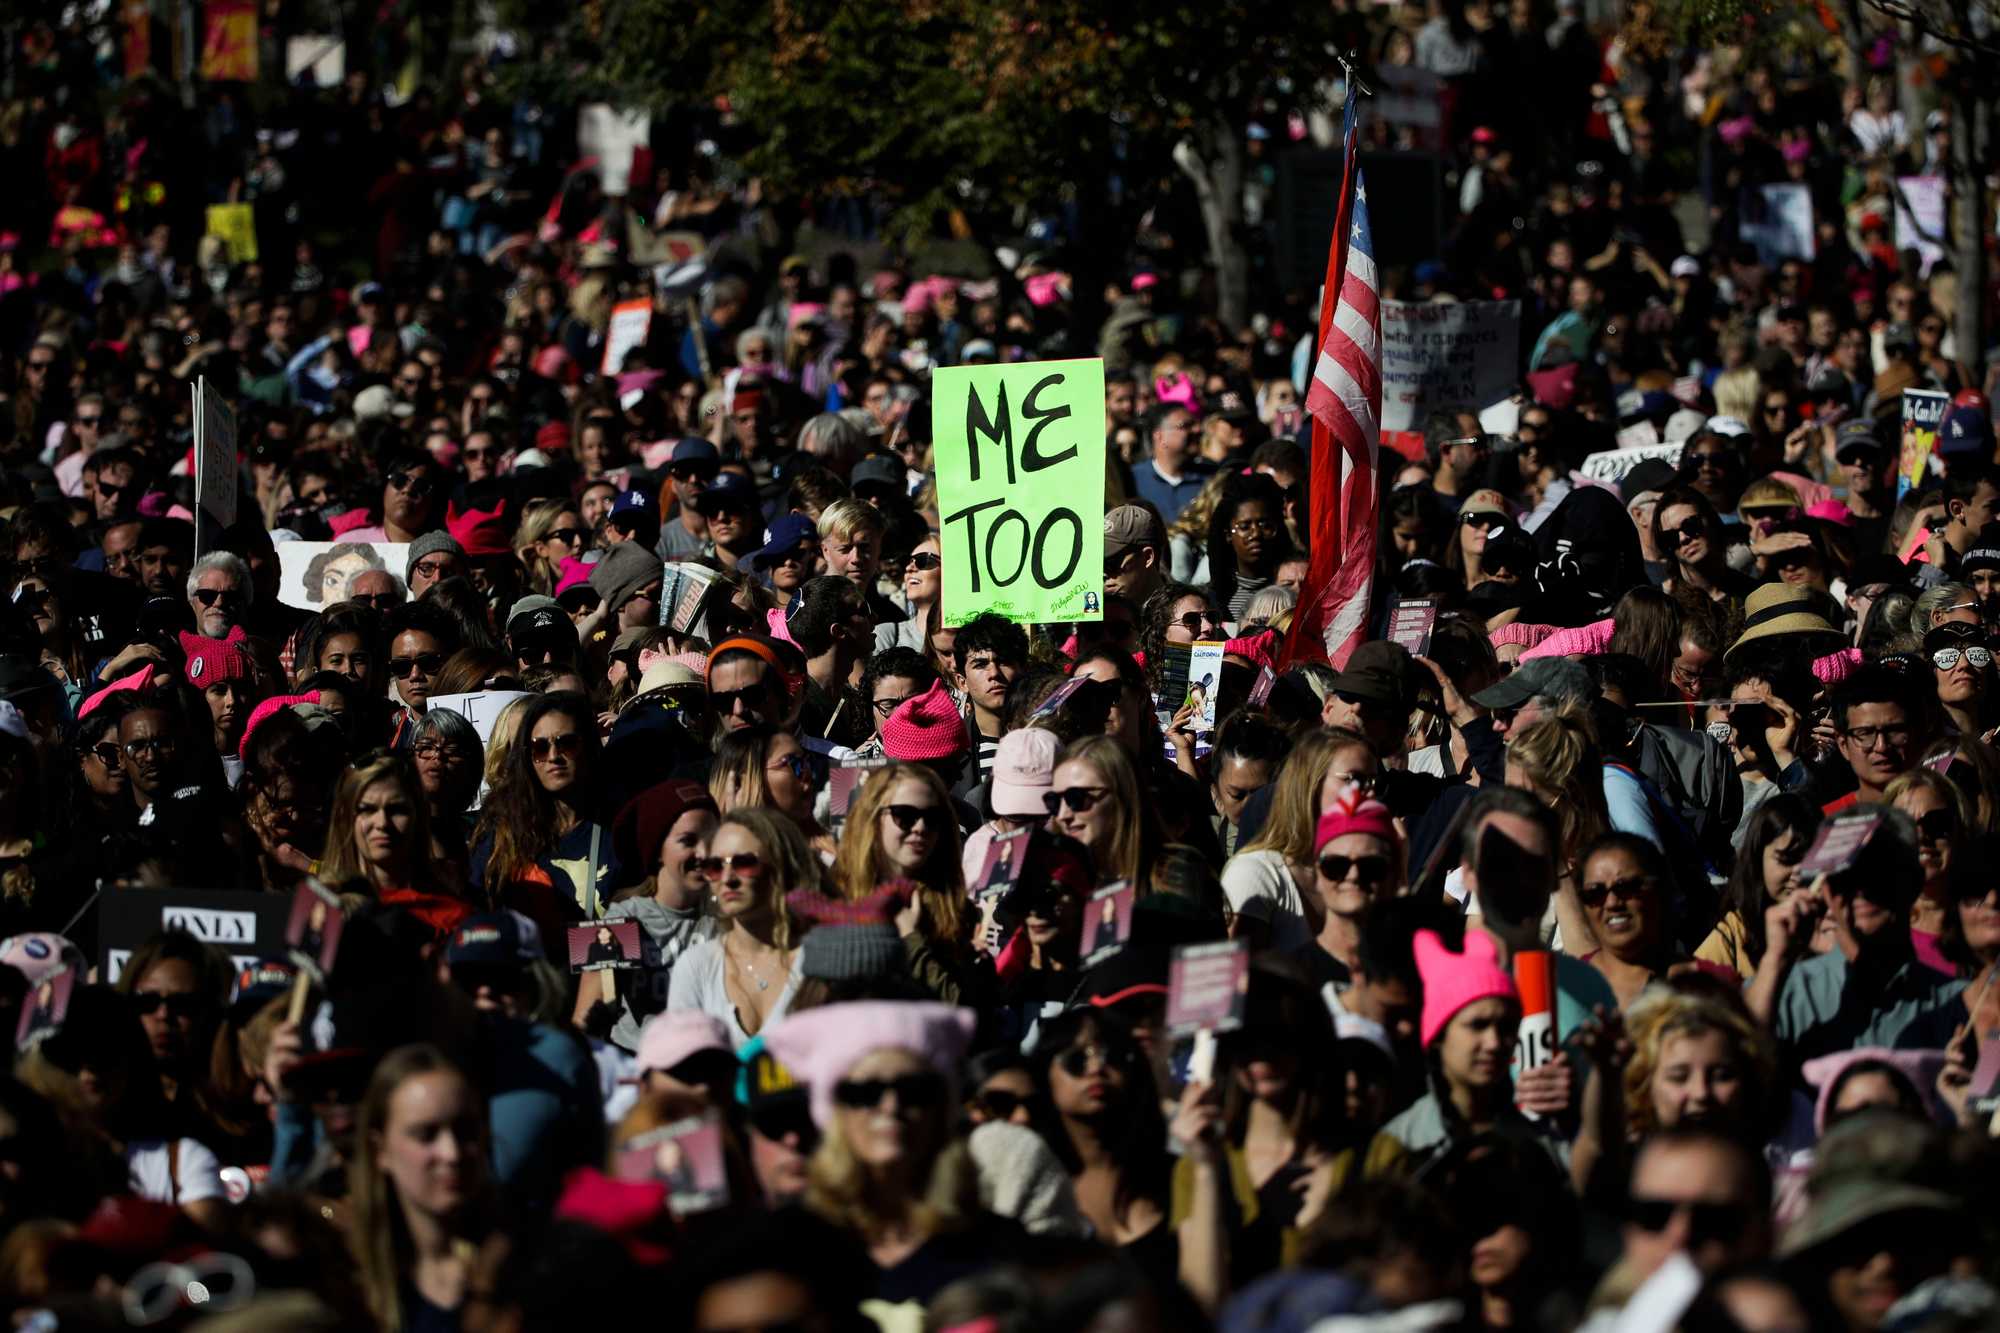 The #Metoo movement is credited with bringing accountability on sexual harassment in the workplace, elevating once marginal voices, and inspiring millions of people, including these demonstrators in Los Angeles on Jan. 20, 2018.
